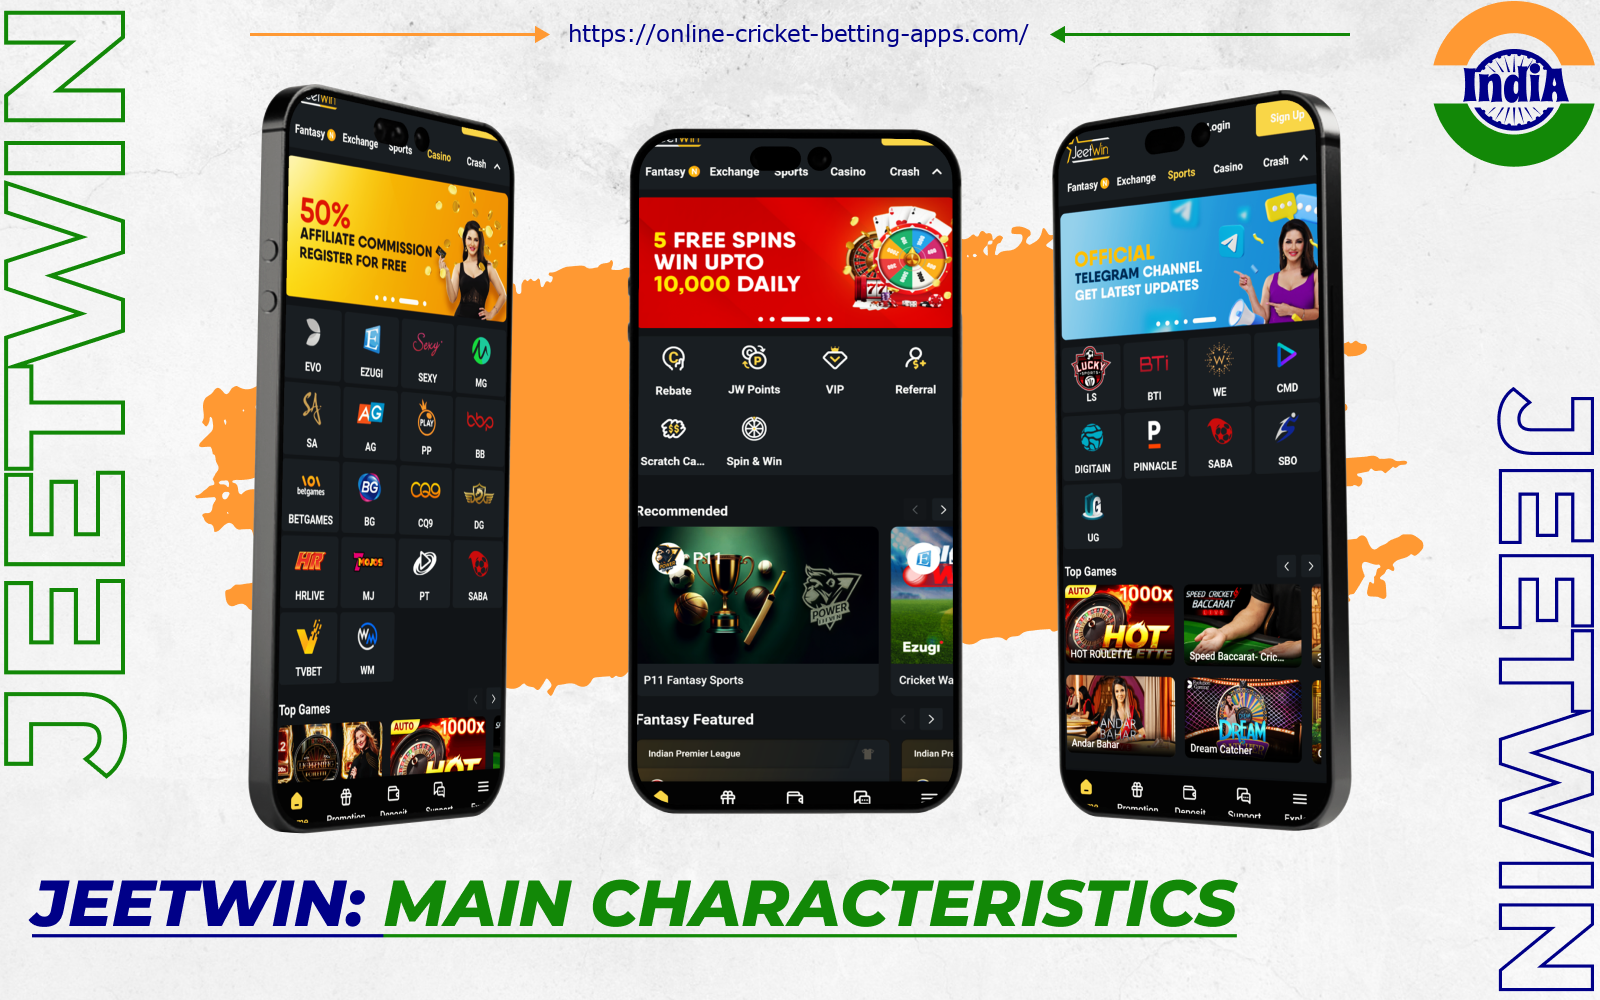 Jeetwin's mobile app will be able to offer Indian bettors and casino enthusiasts a complete set of essential tools for real-money gaming